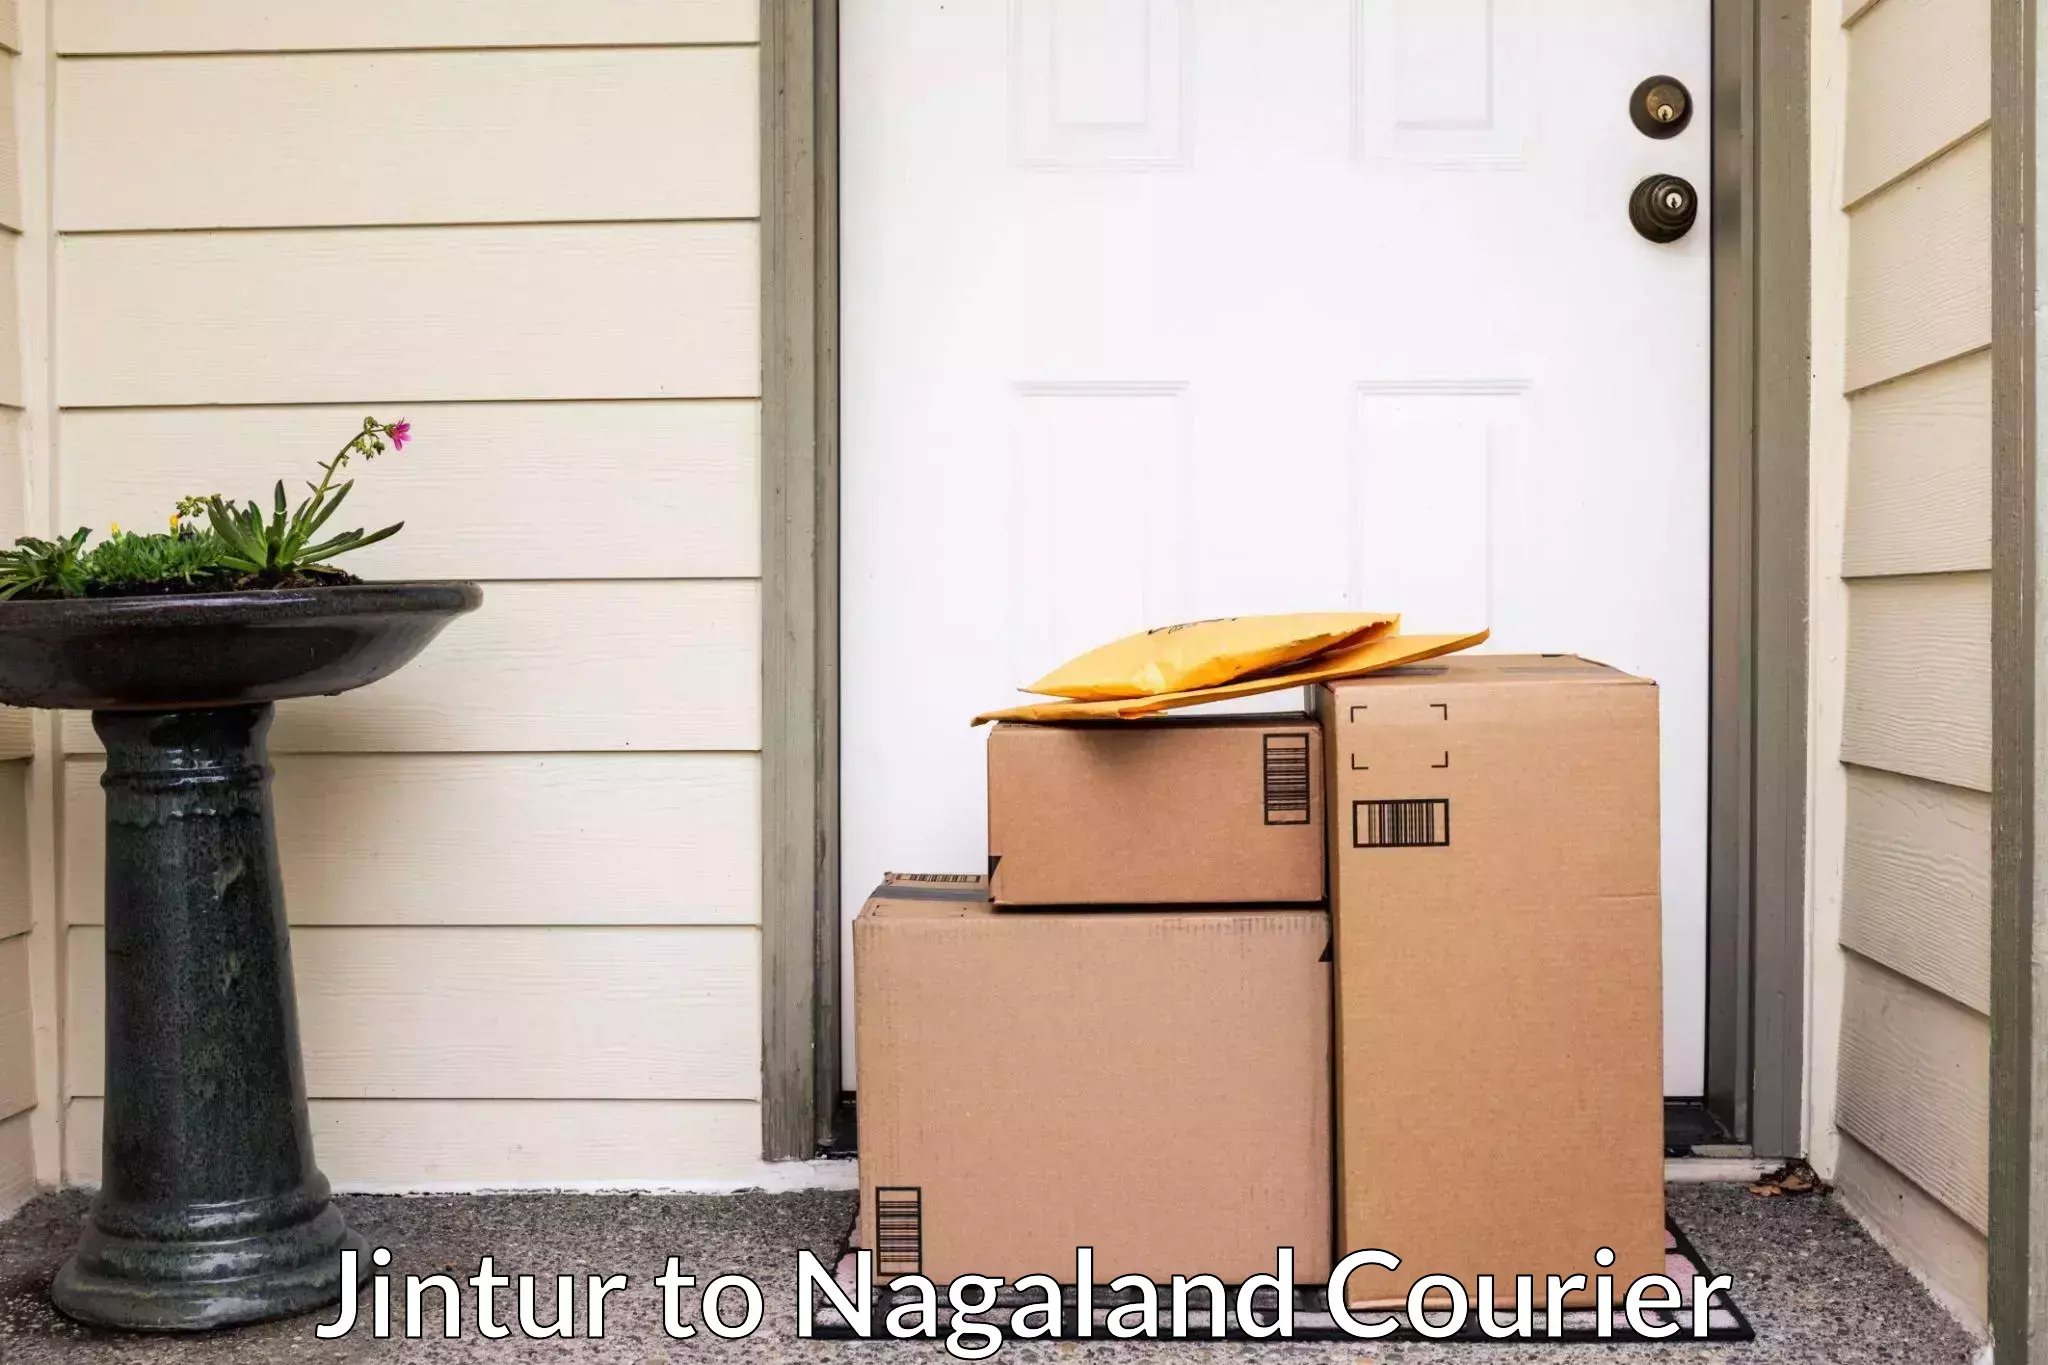 Affordable relocation services in Jintur to Nagaland